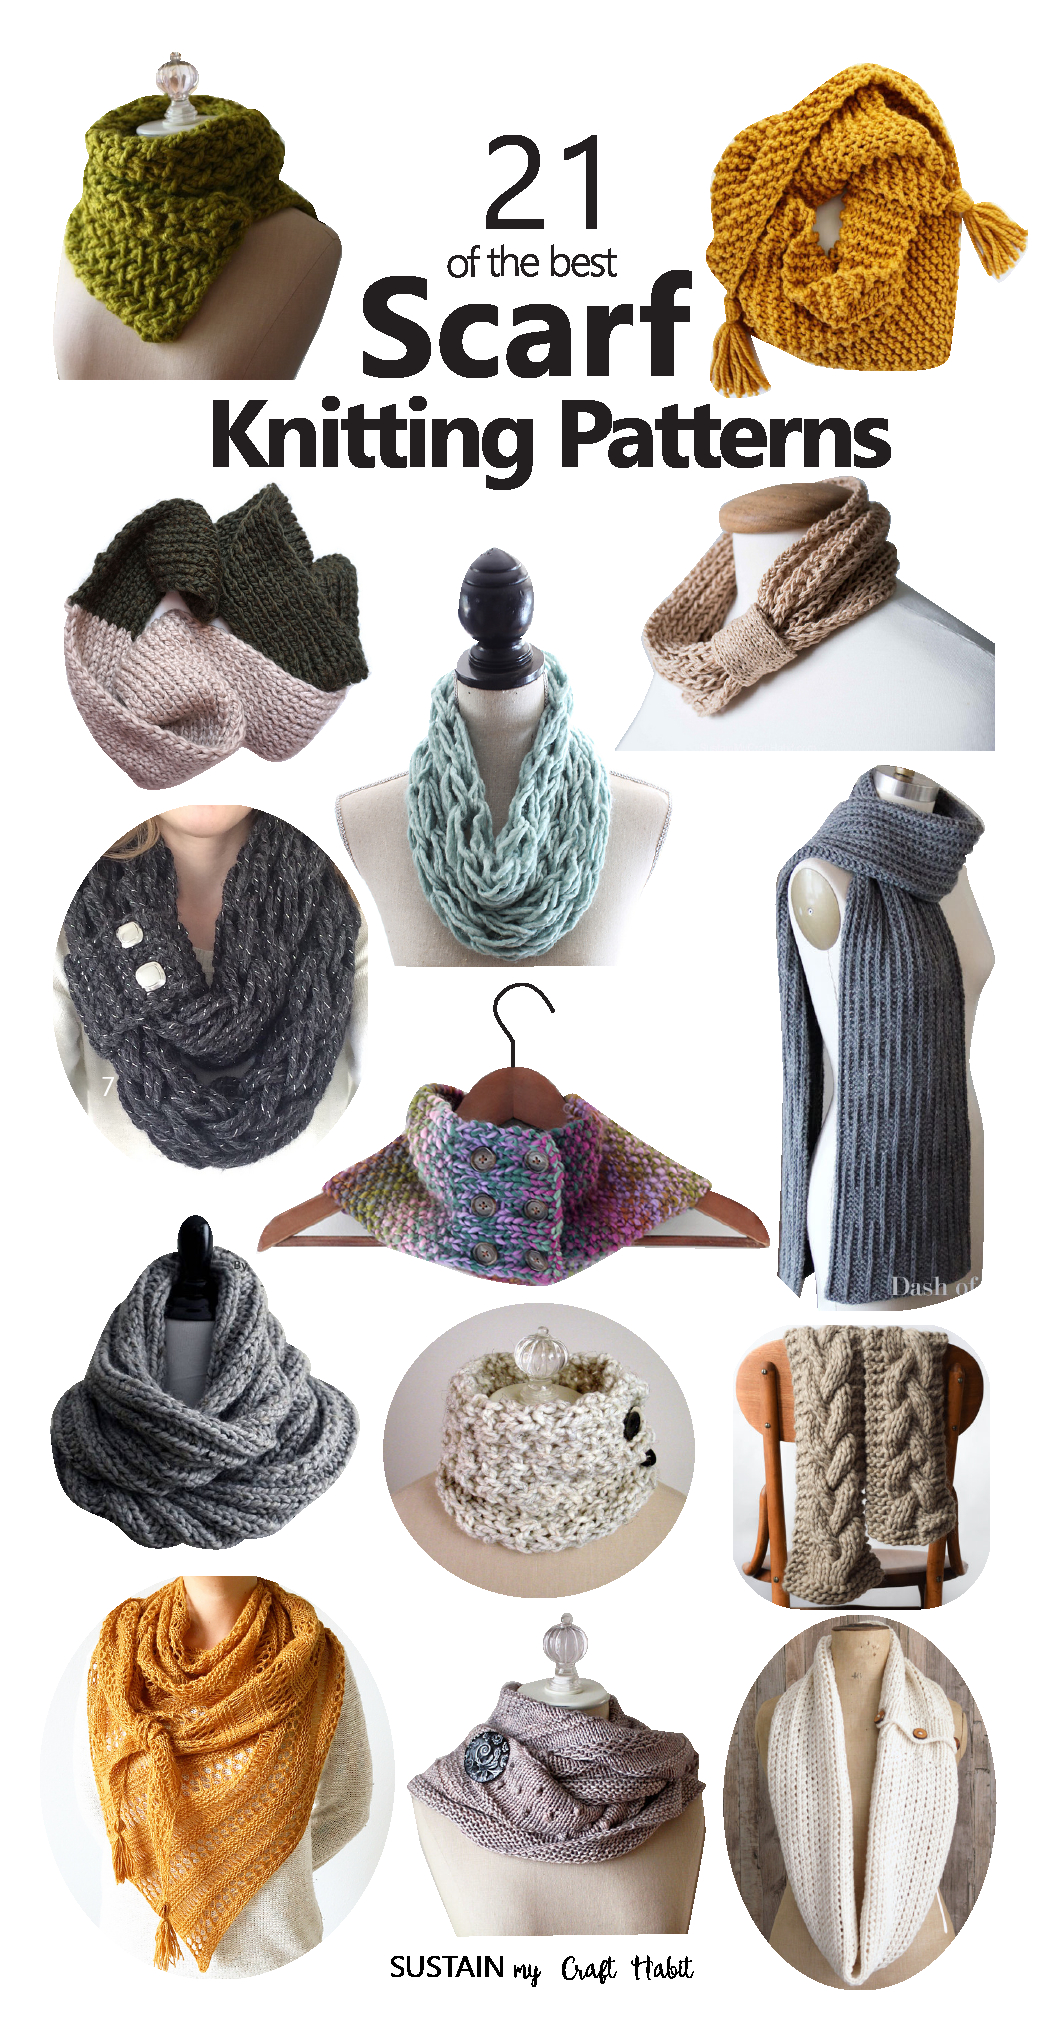 Patterns To Knit 21 Of The Best Scarf Knitting Patterns Sustain My Craft Habit